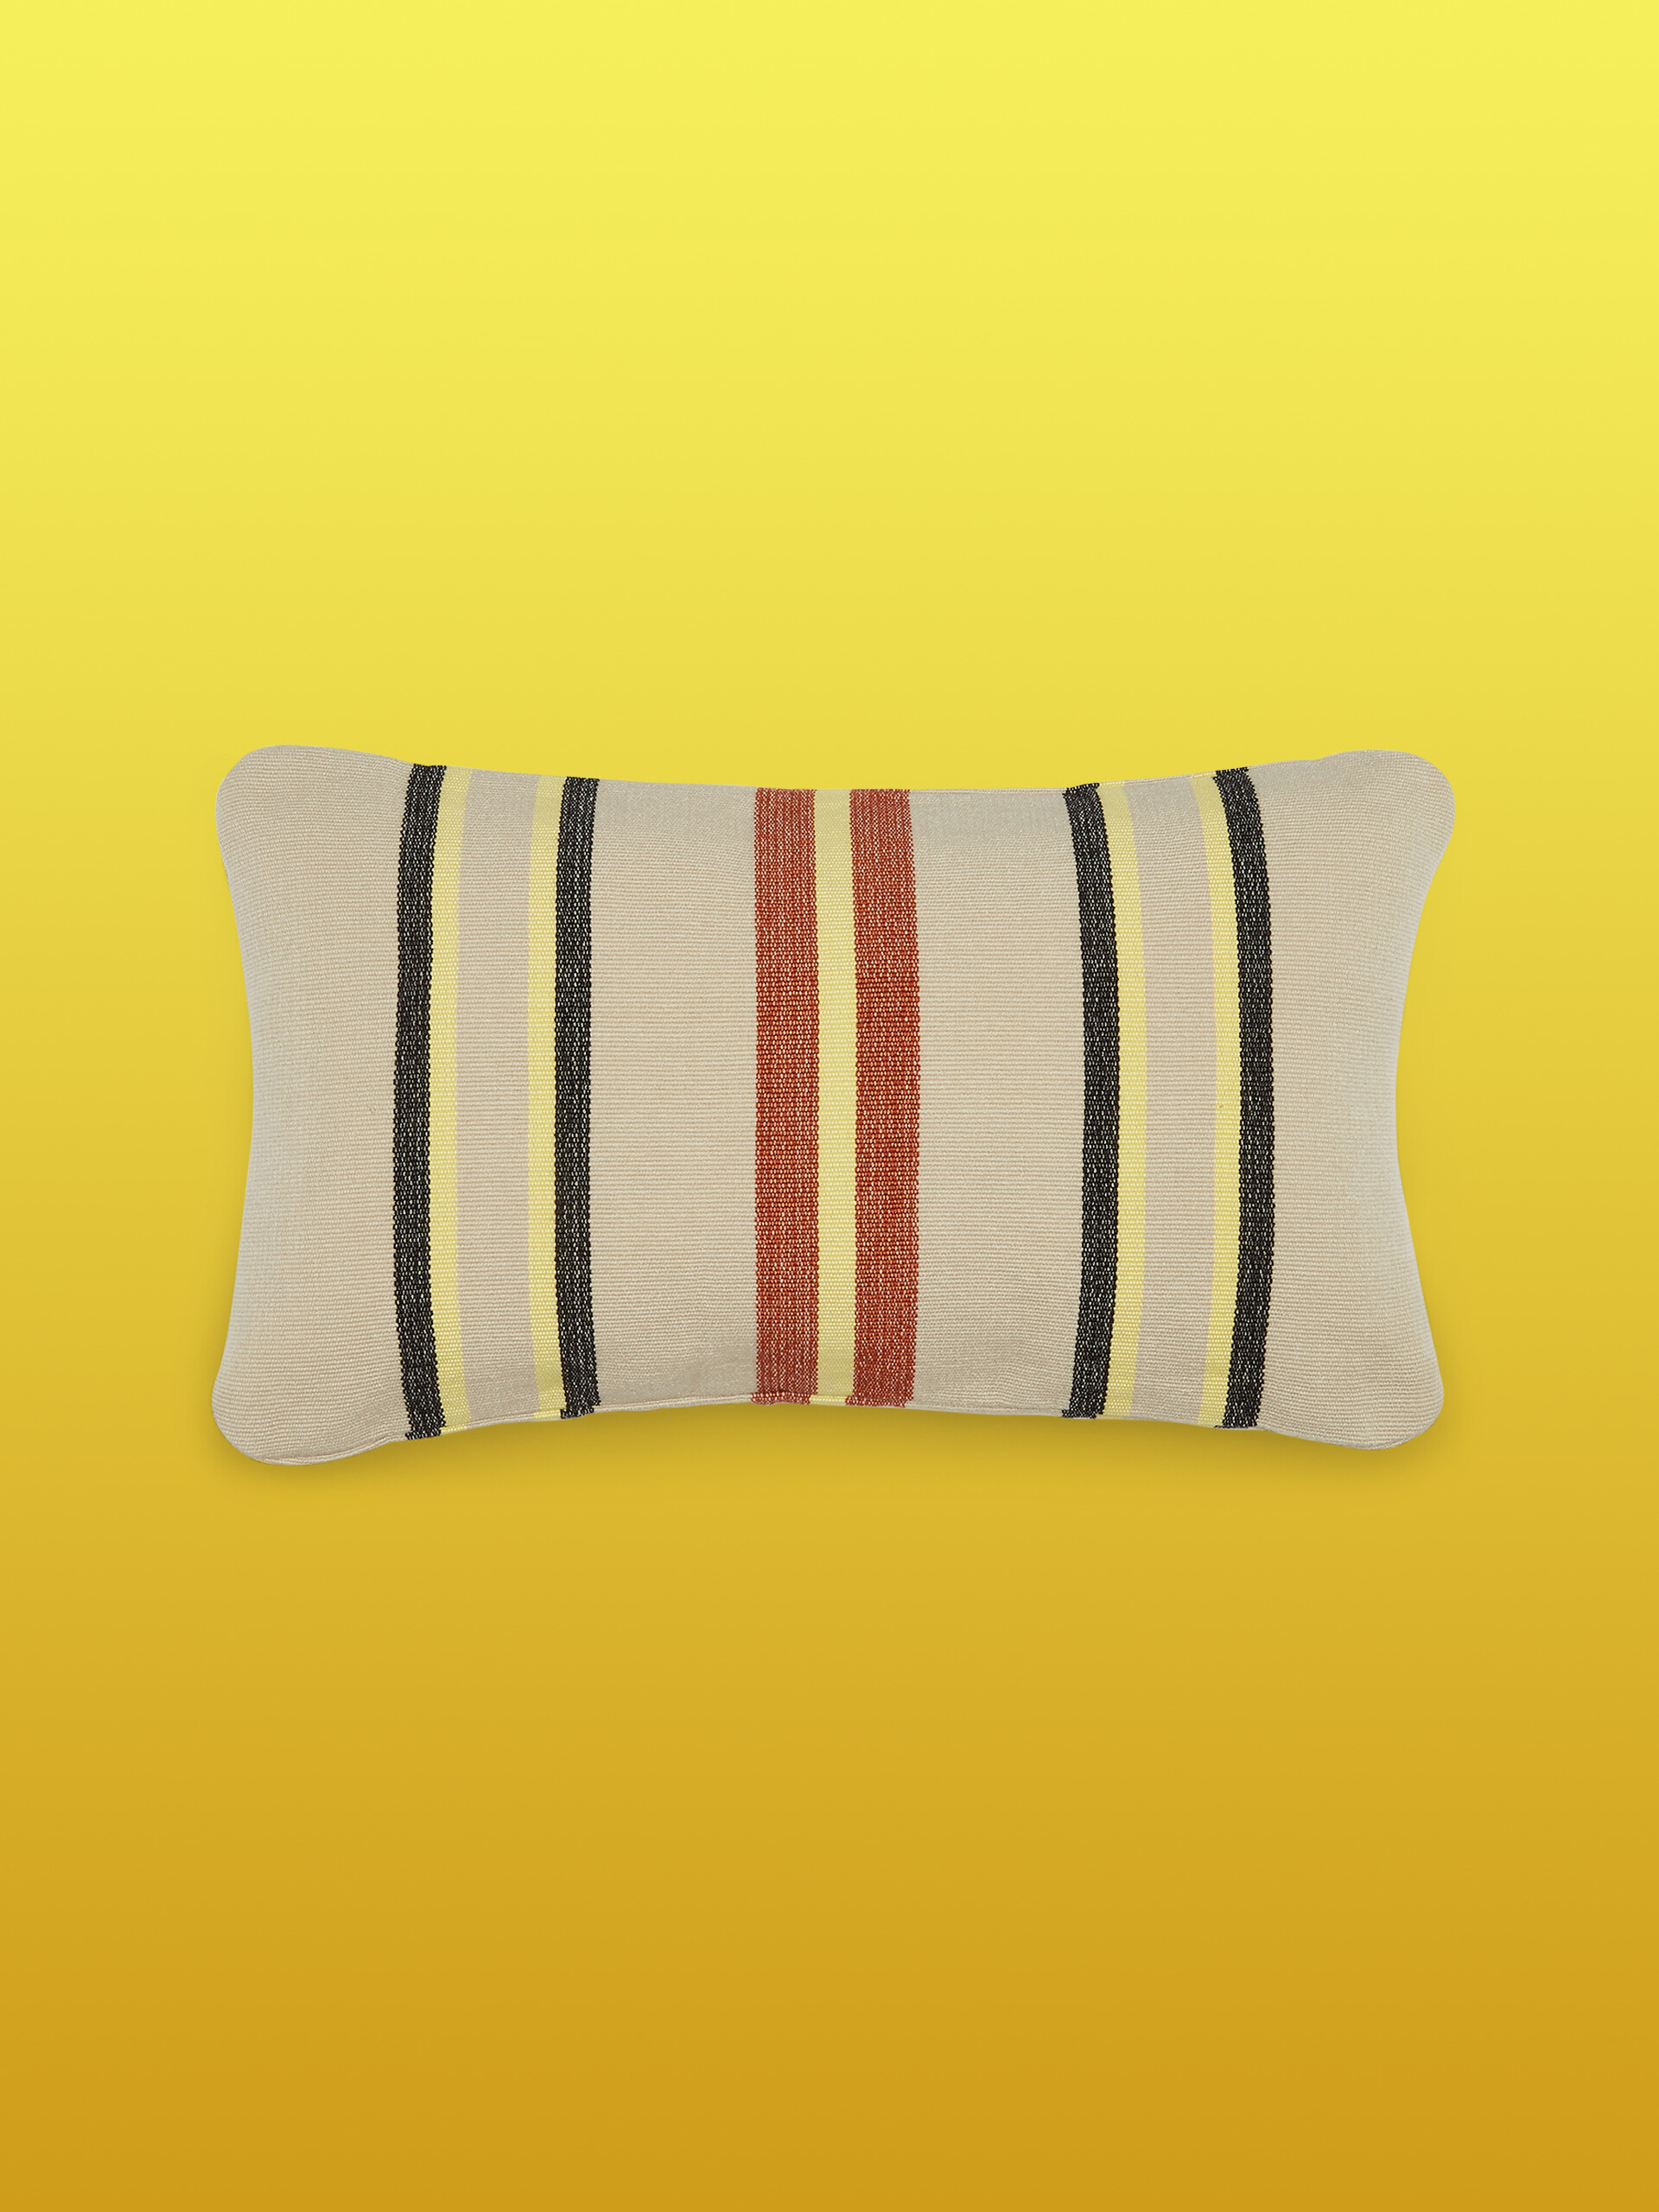 MARNI MARKET rectangular pillow cover in polyester with beige yellow and black vertical stripes - Furniture - Image 1